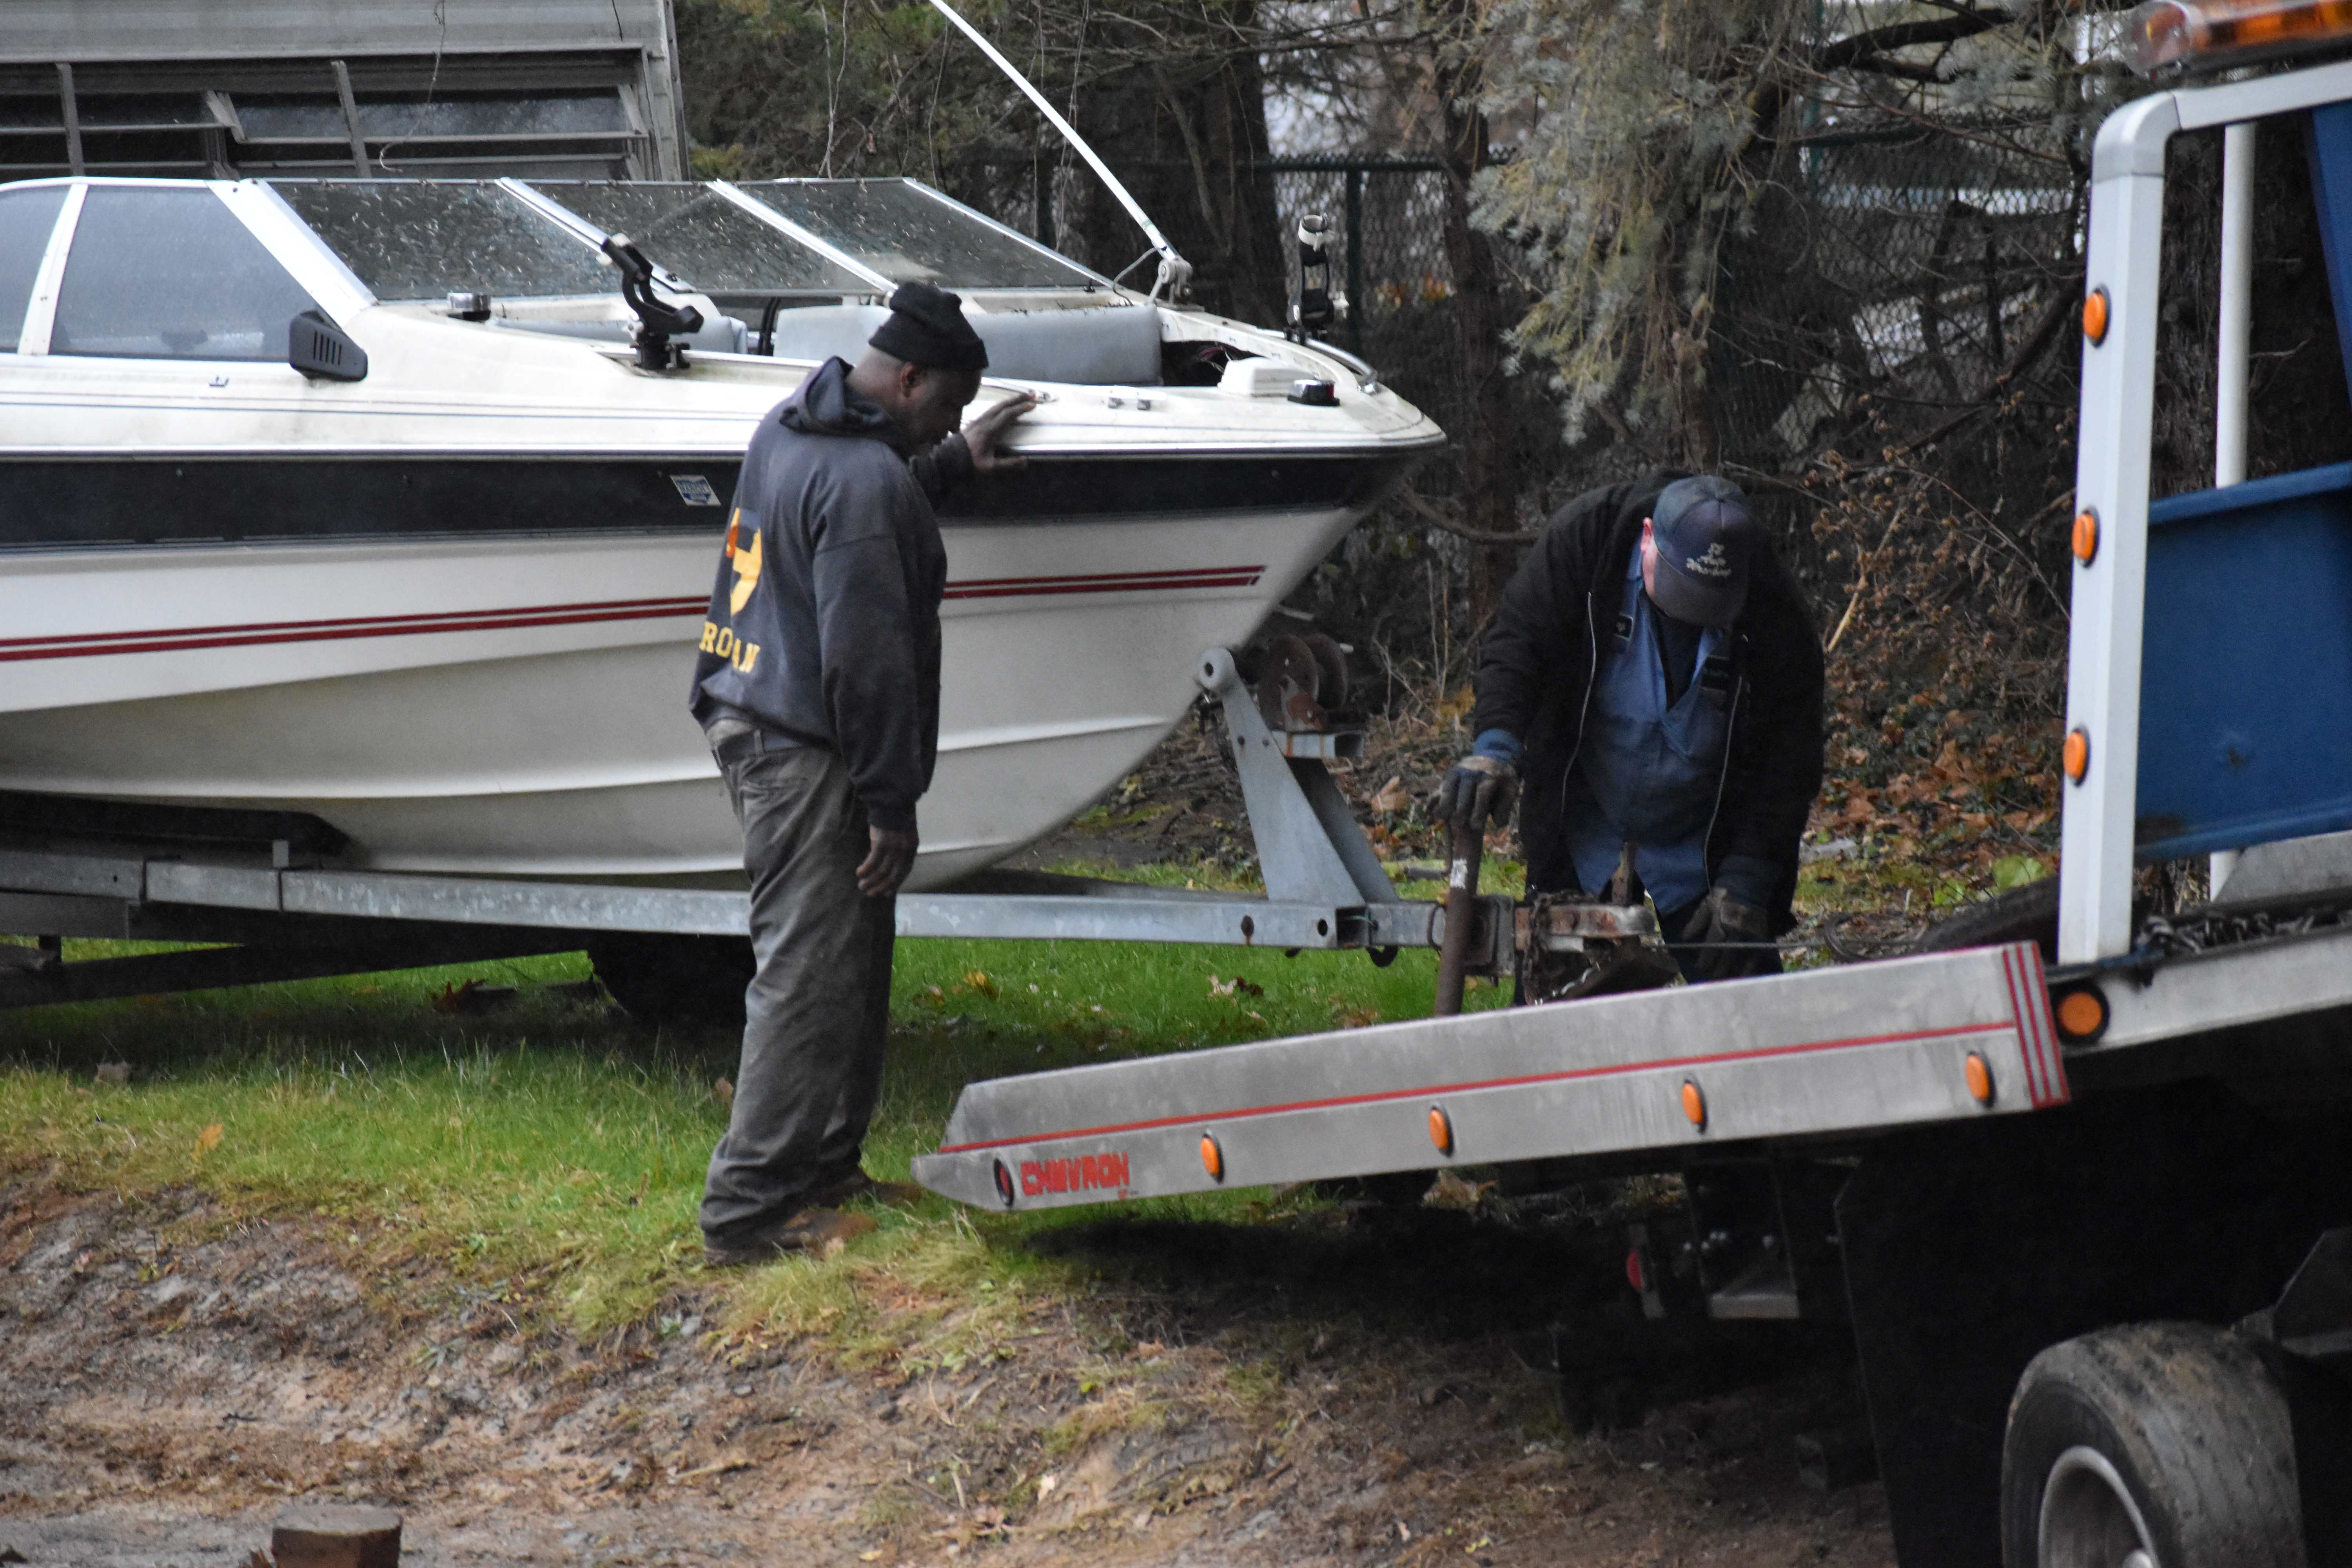 Tommie Phillips, left, watches as an employee of Schultz Towing and Recovery tries to position a boat trailer for loading on a wrecker.